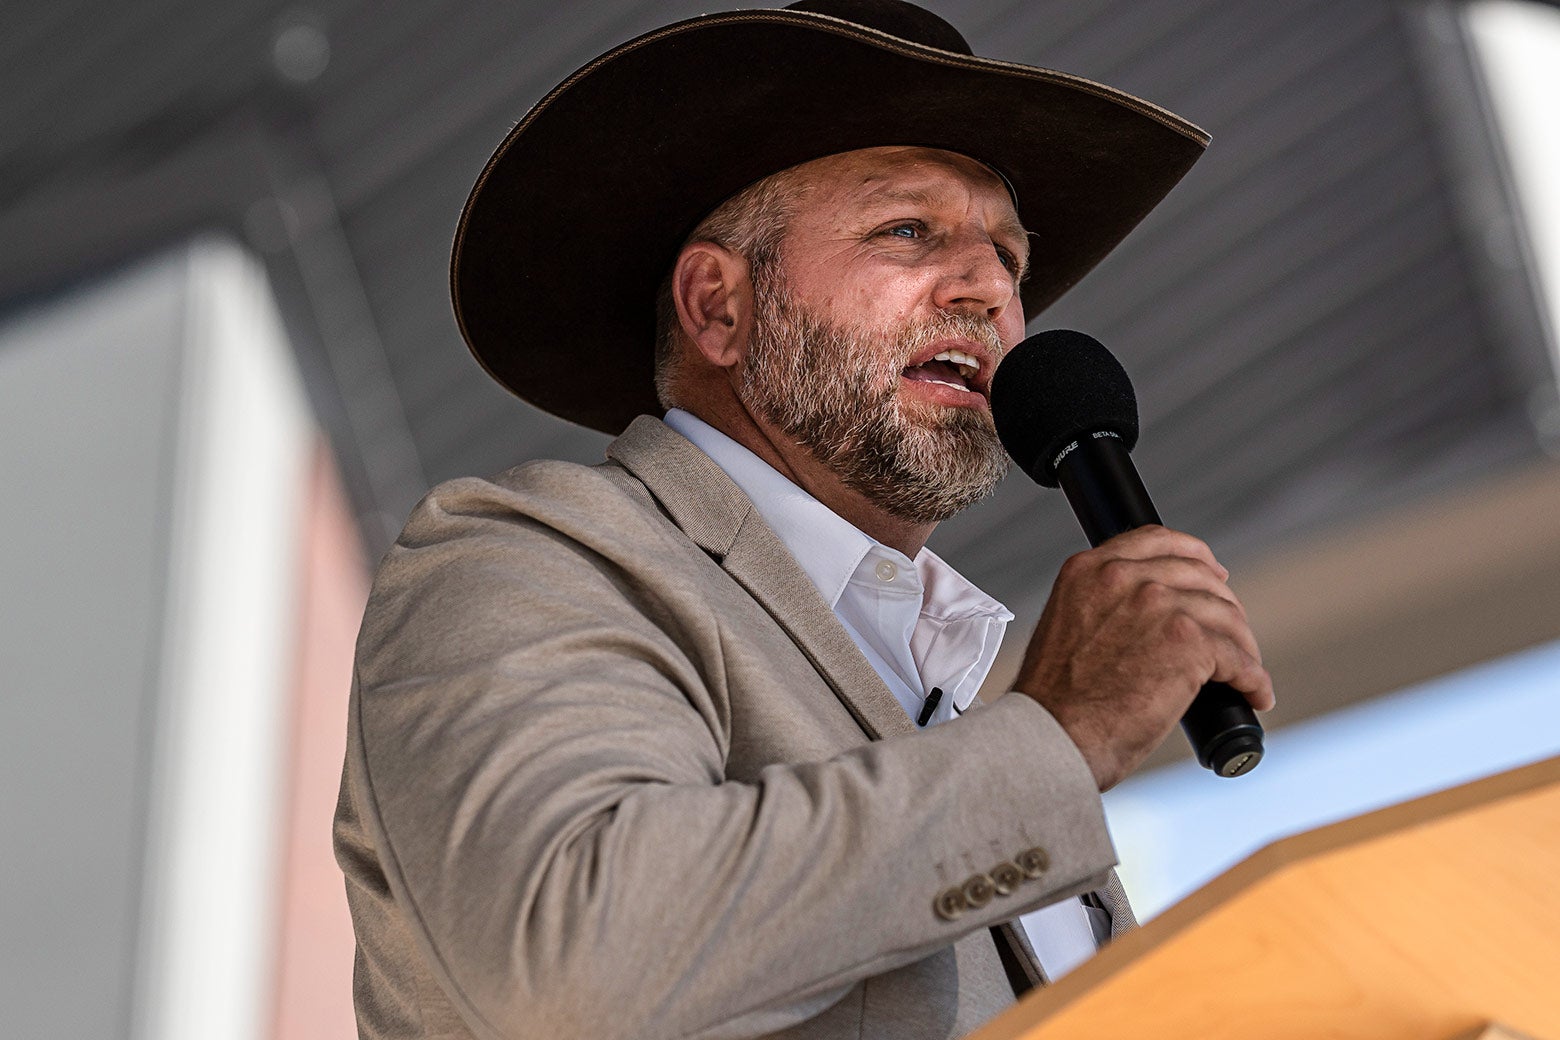 A bearded Bundy, wearing a light-colored suit and a cowboy hat, speaks into a handheld microphone.